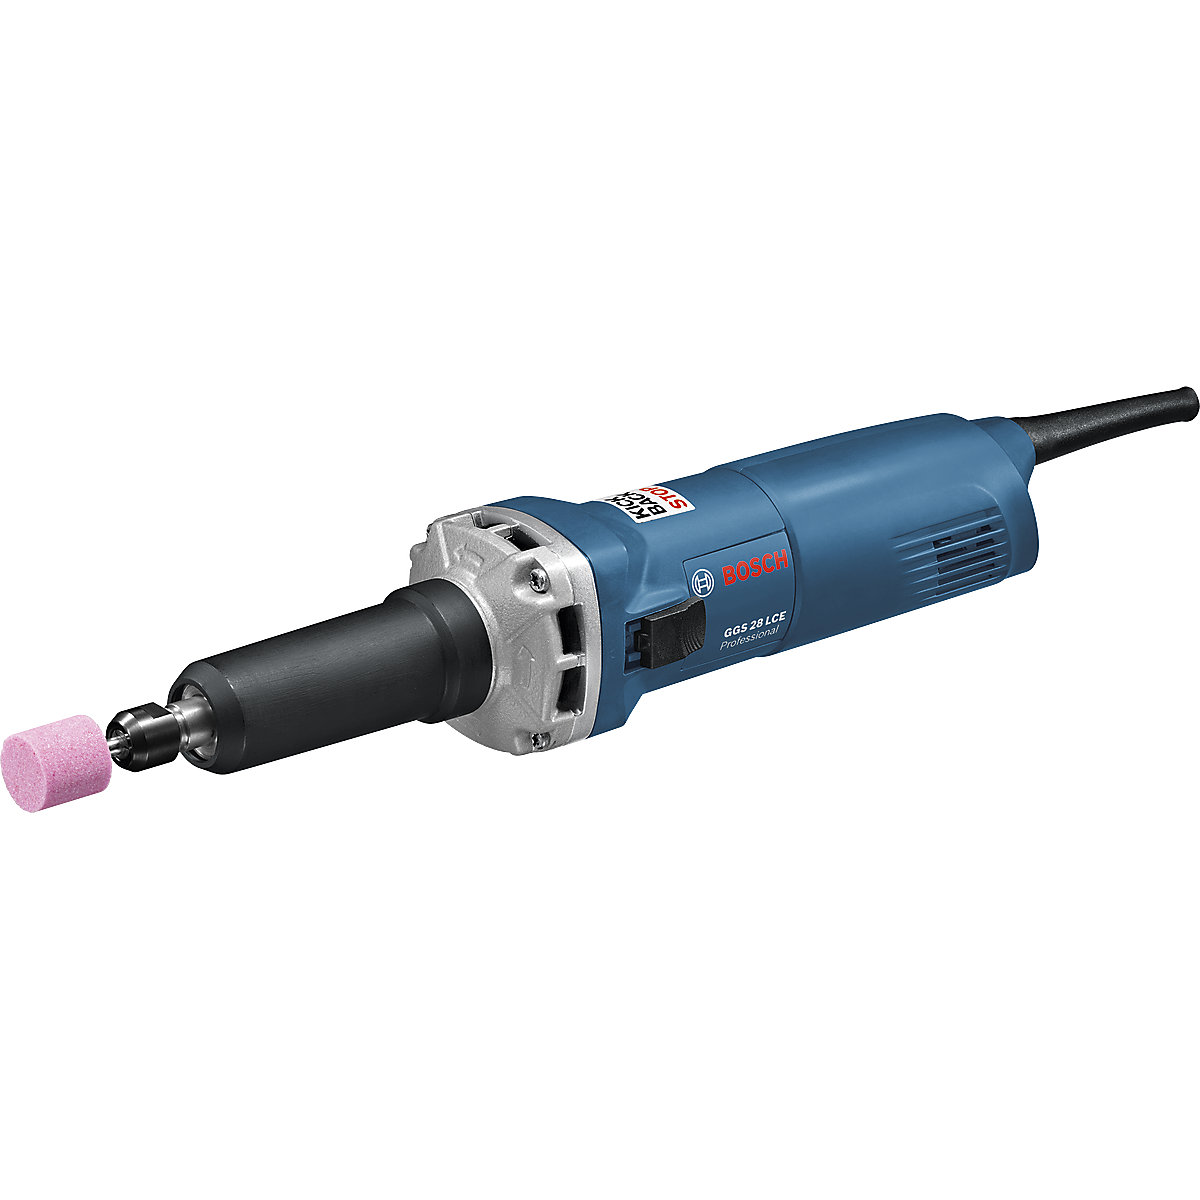 GGS 28 LCE Professional straight grinder – Bosch